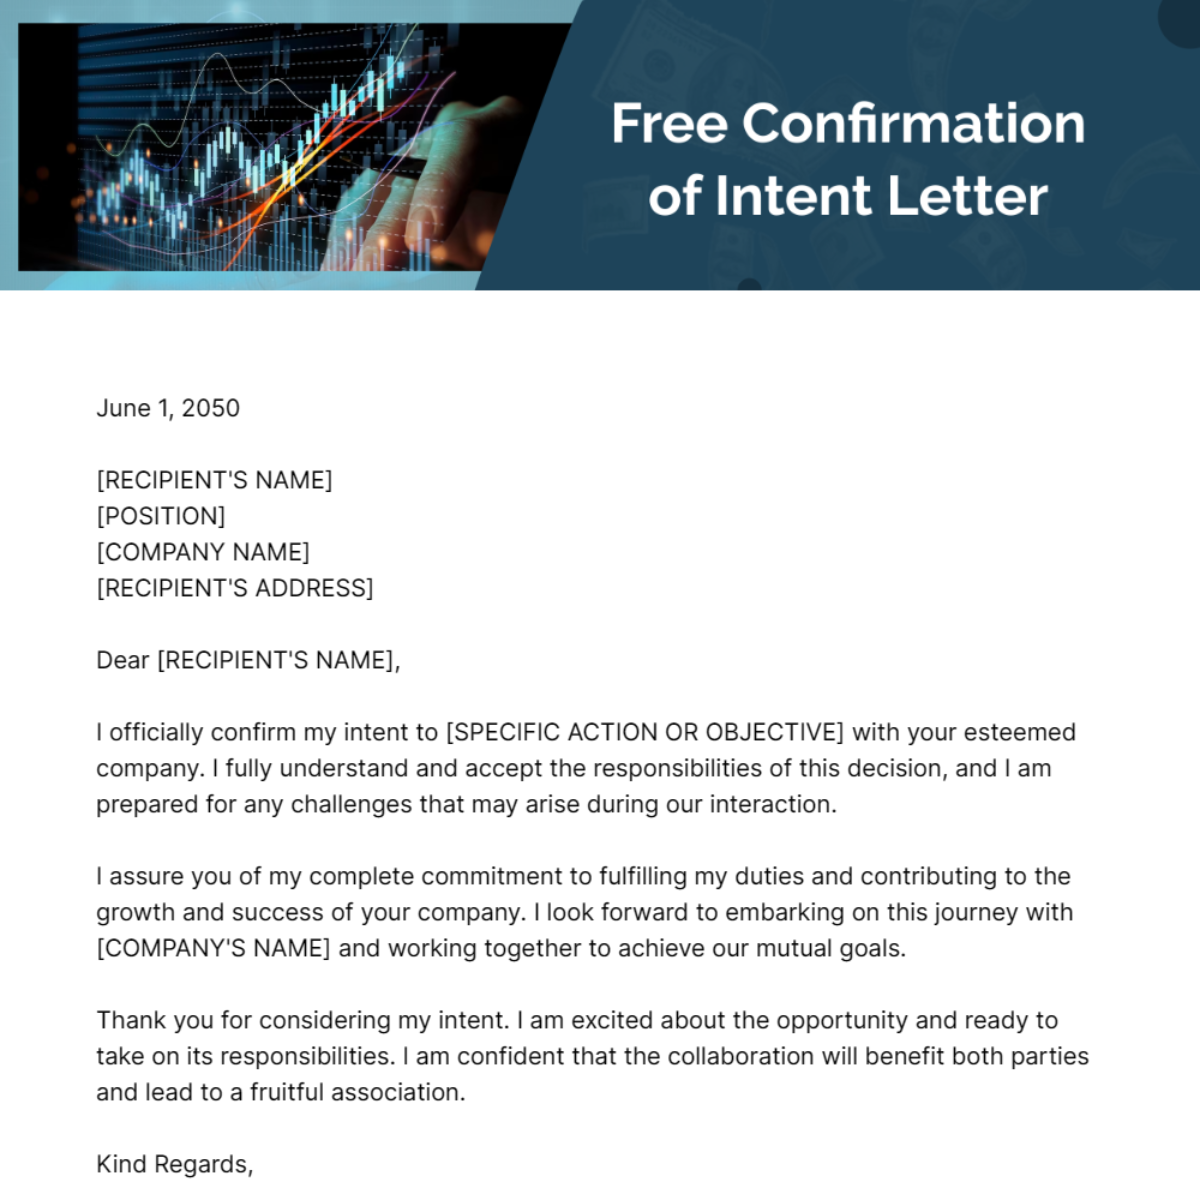 Confirmation of Intent Letter Template